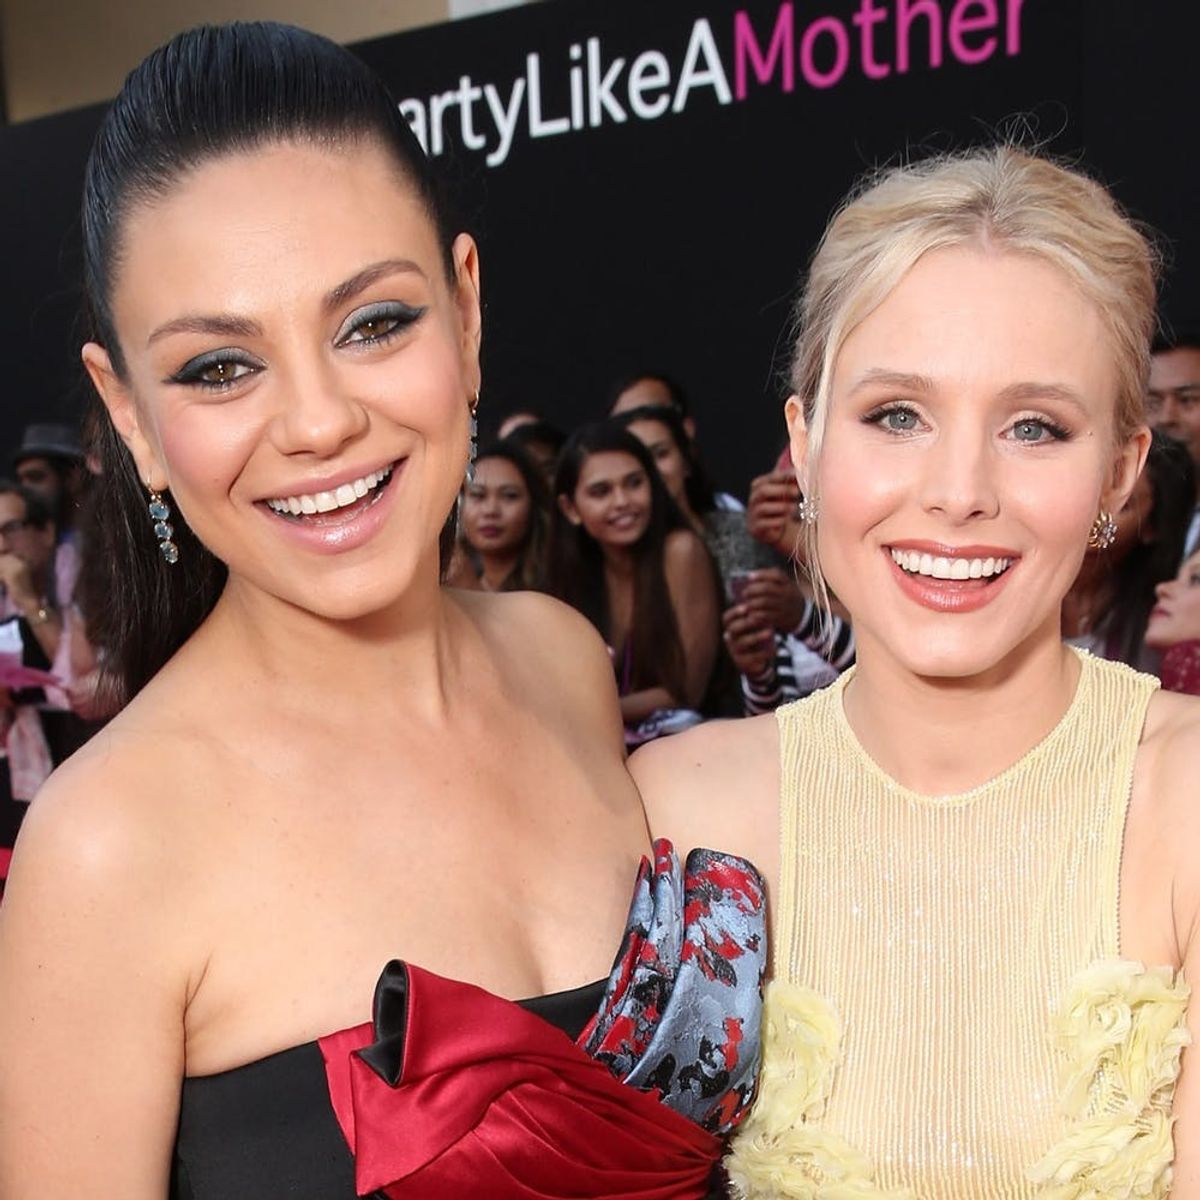 Kristen Bell and Mila Kunis Just Made “Friendship Haircuts” a Thing